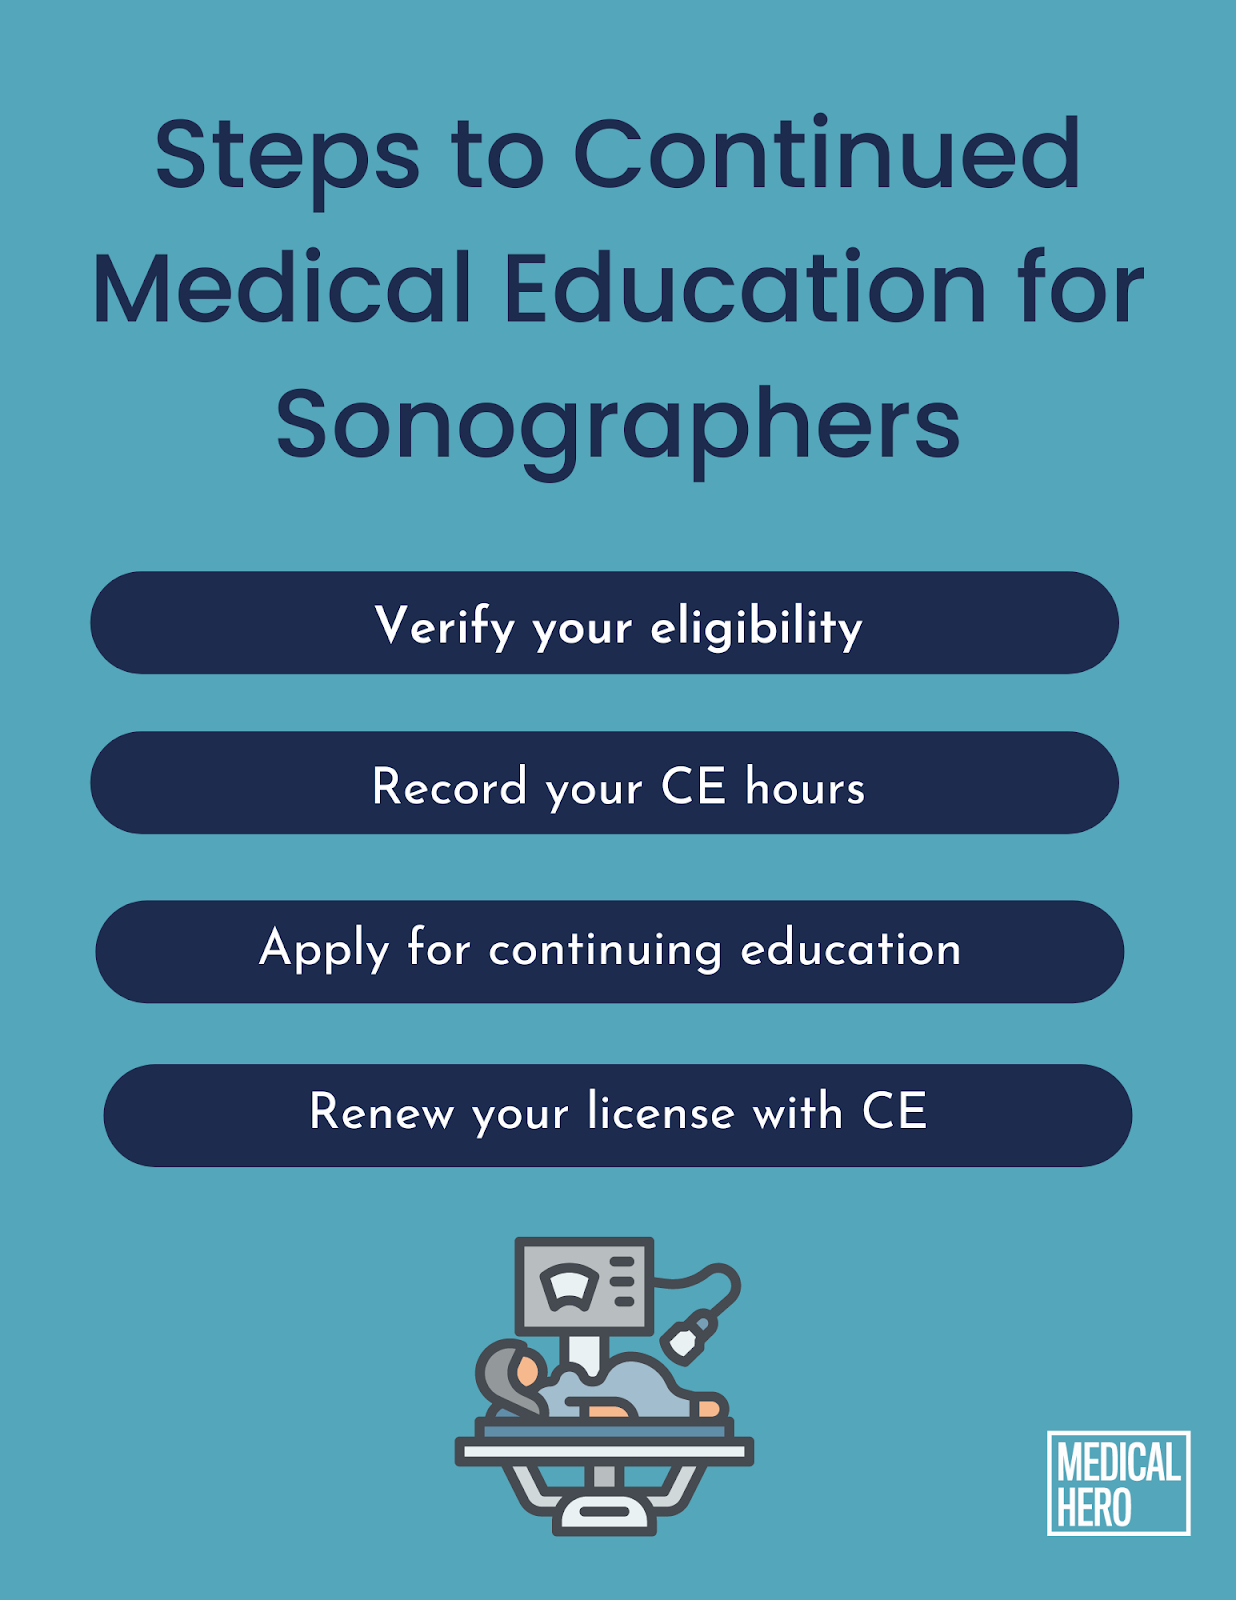 Steps to Continued Medical Education for Sonographers